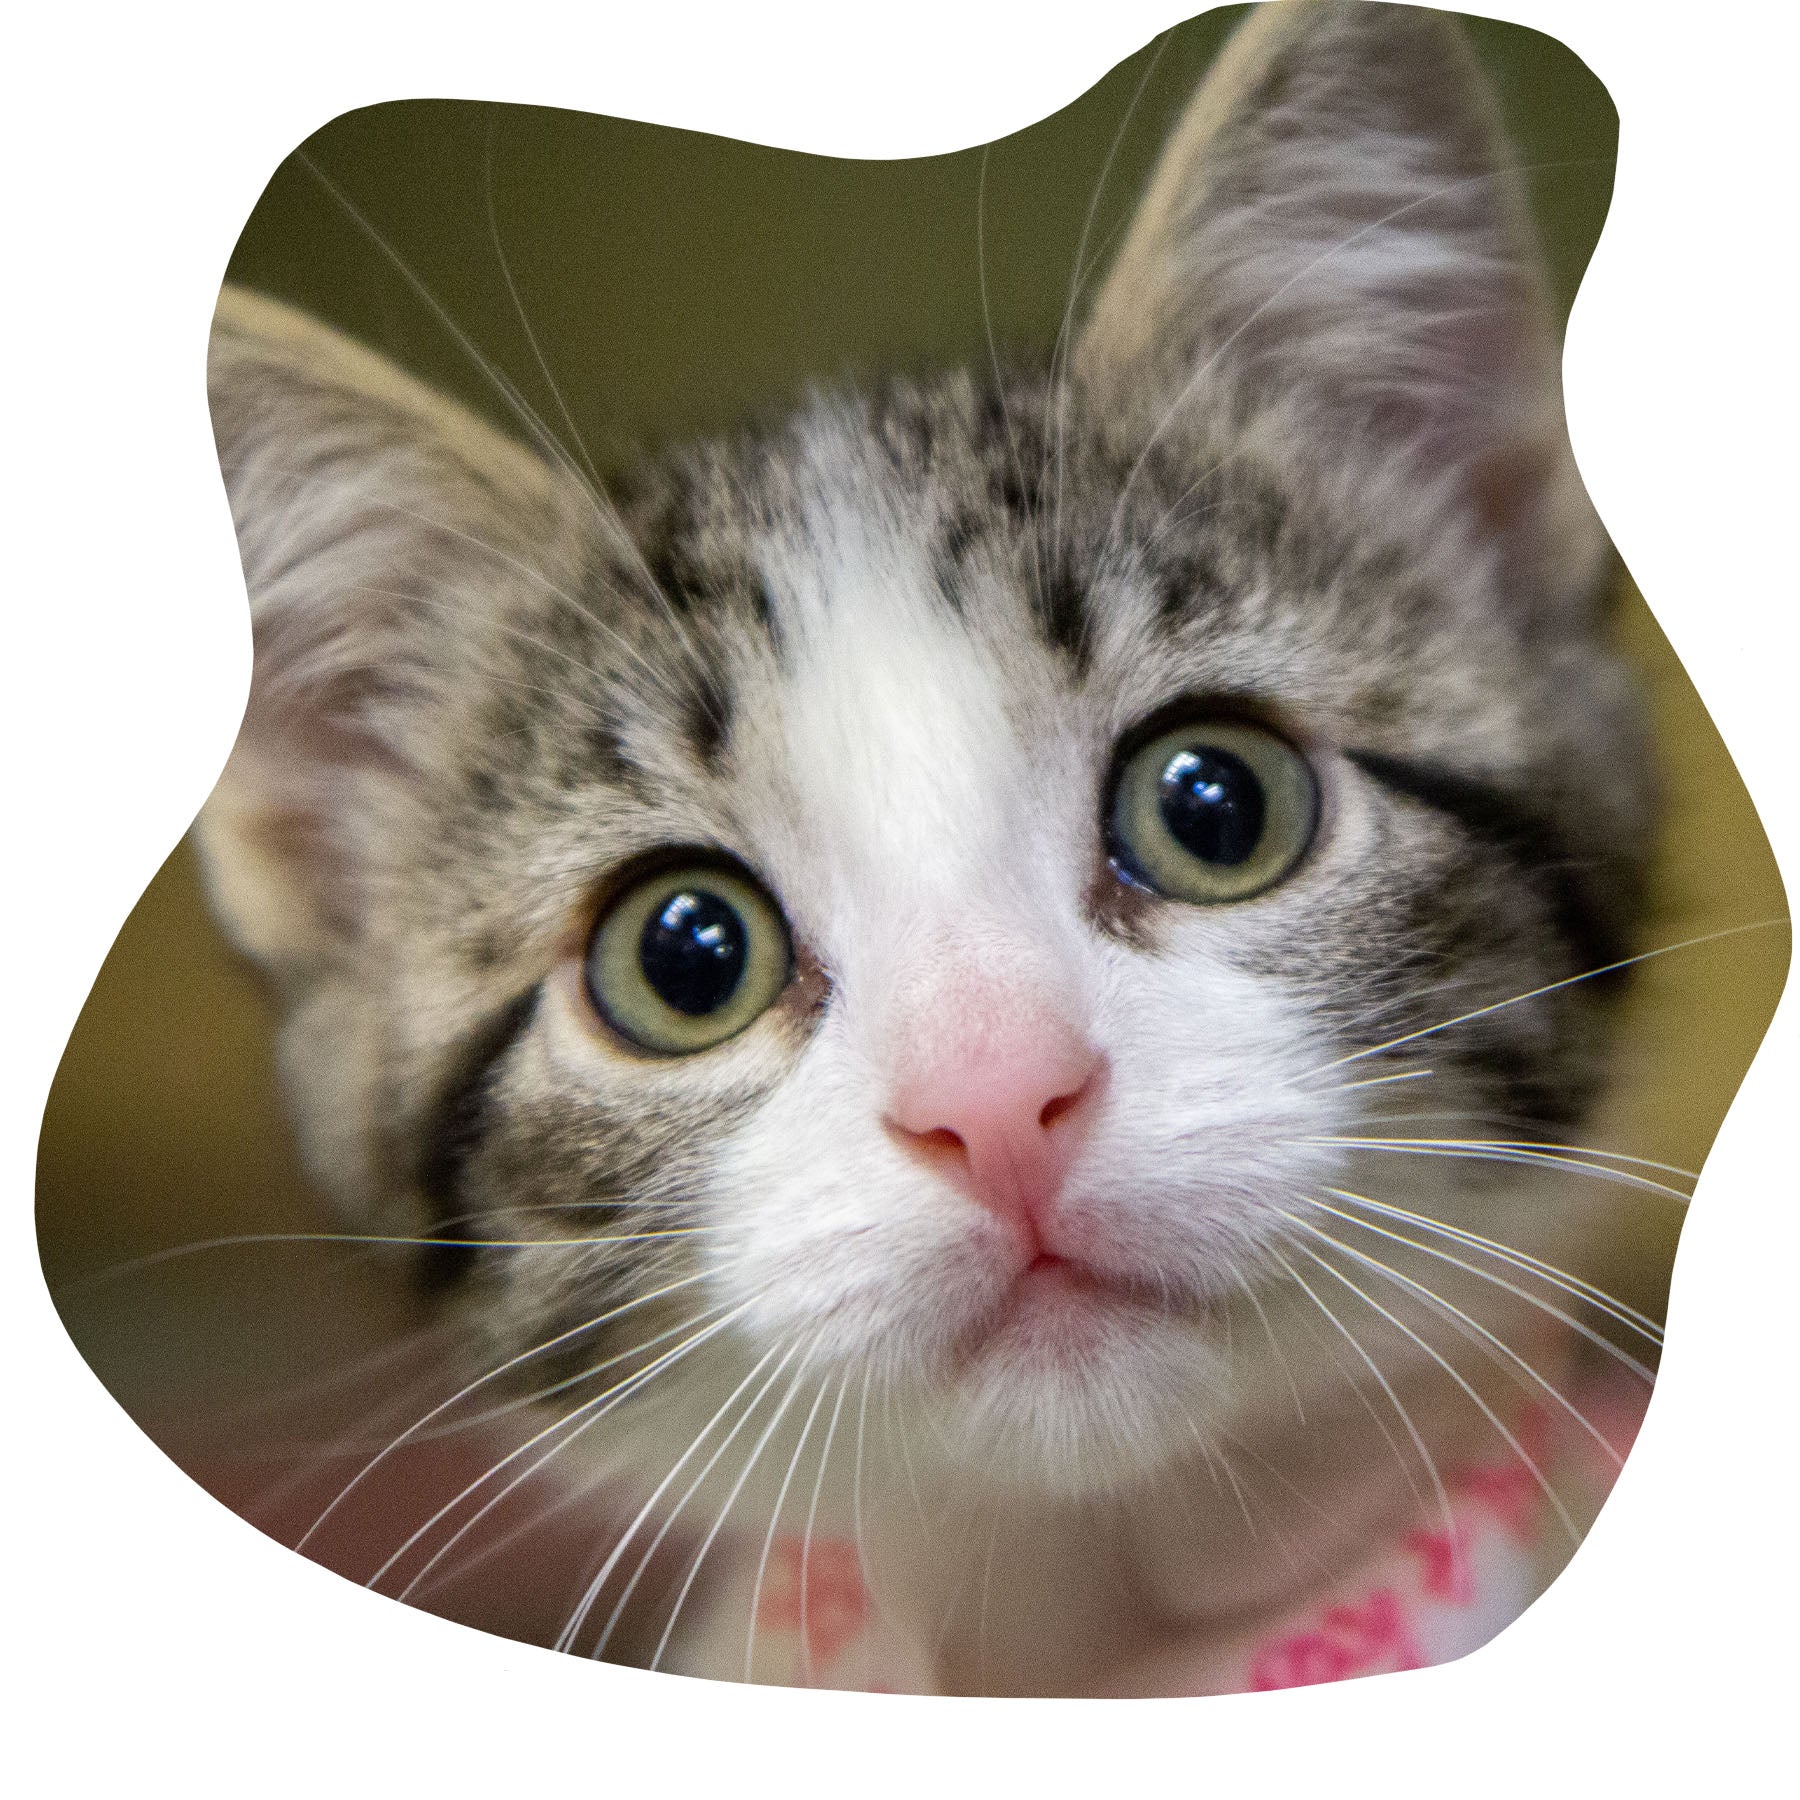 Kitten with green eyes looking at the camera. Cat products link